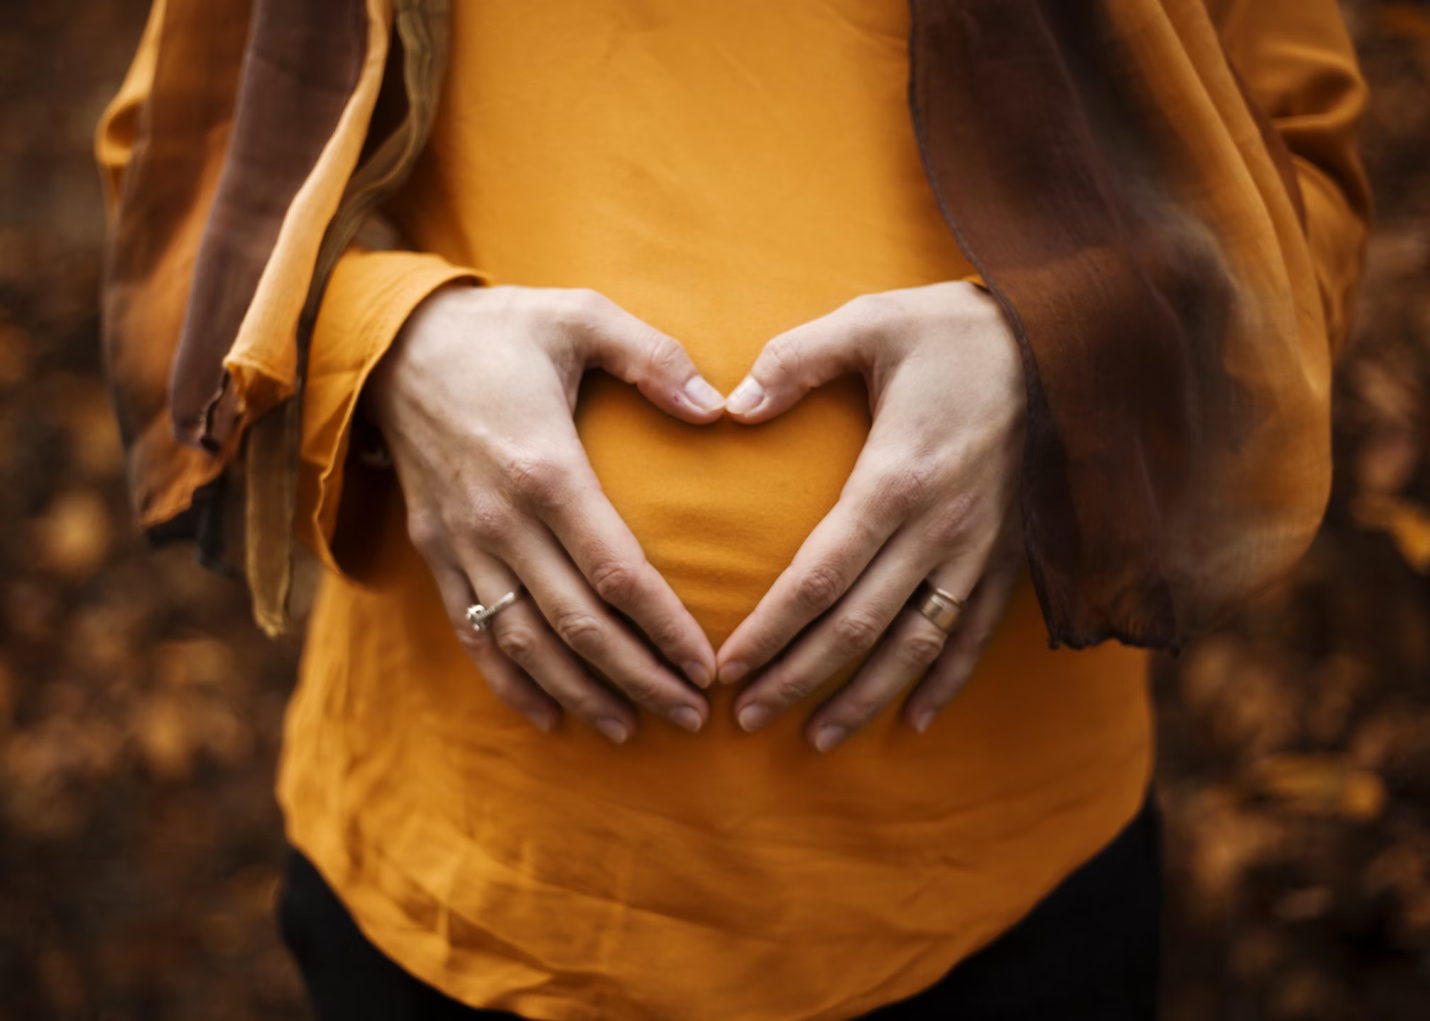 A photo showing a person holding their stomach